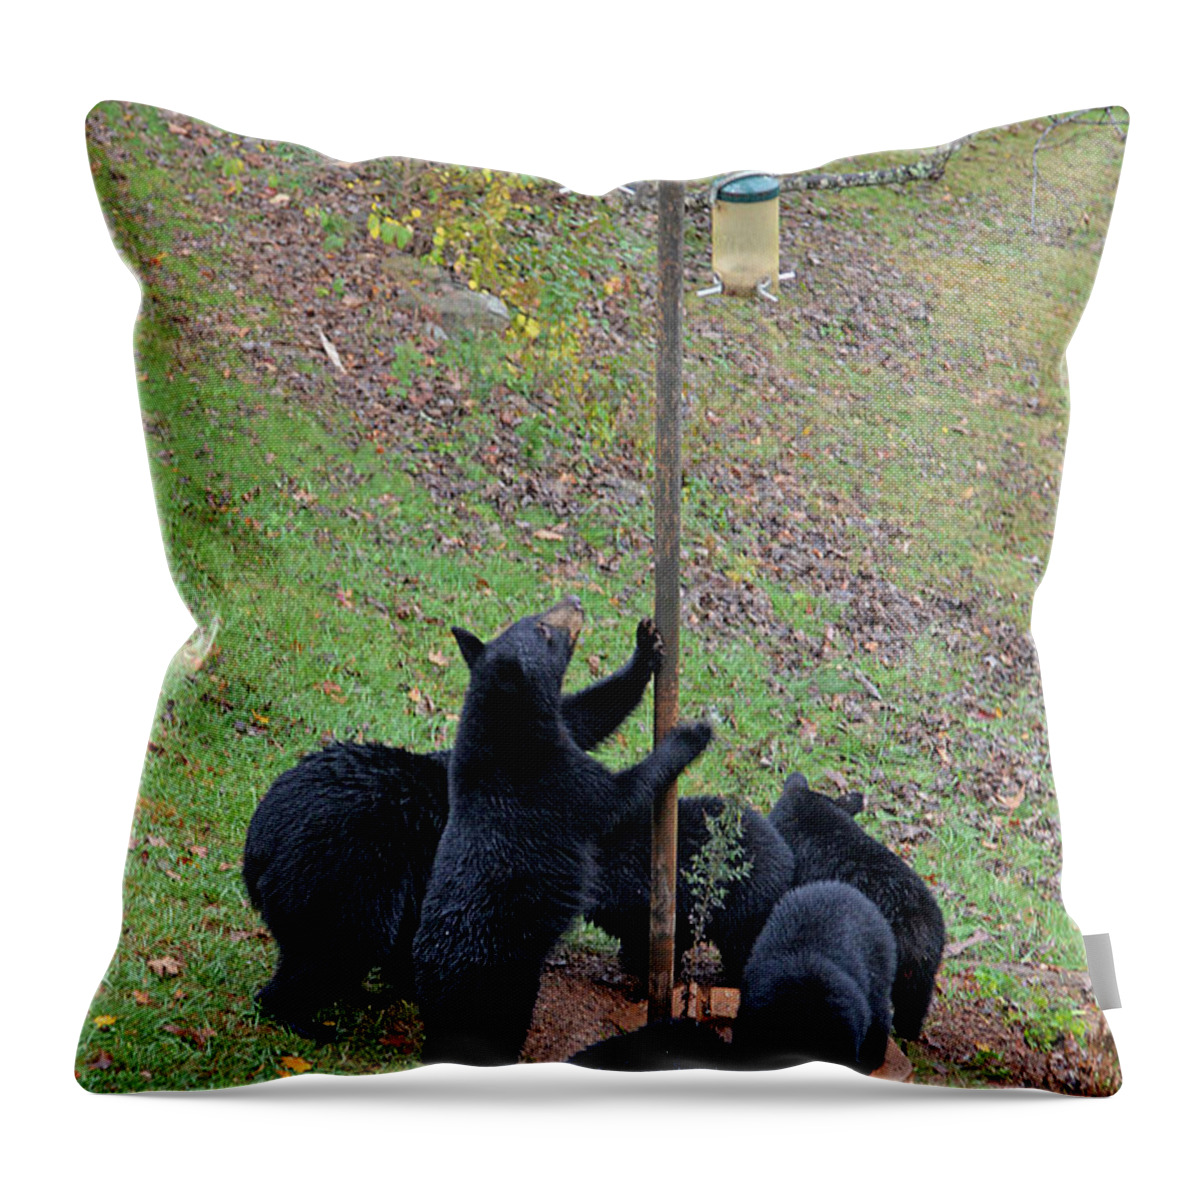 Mammal Throw Pillow featuring the photograph The Gangs All Here by Alan Lenk